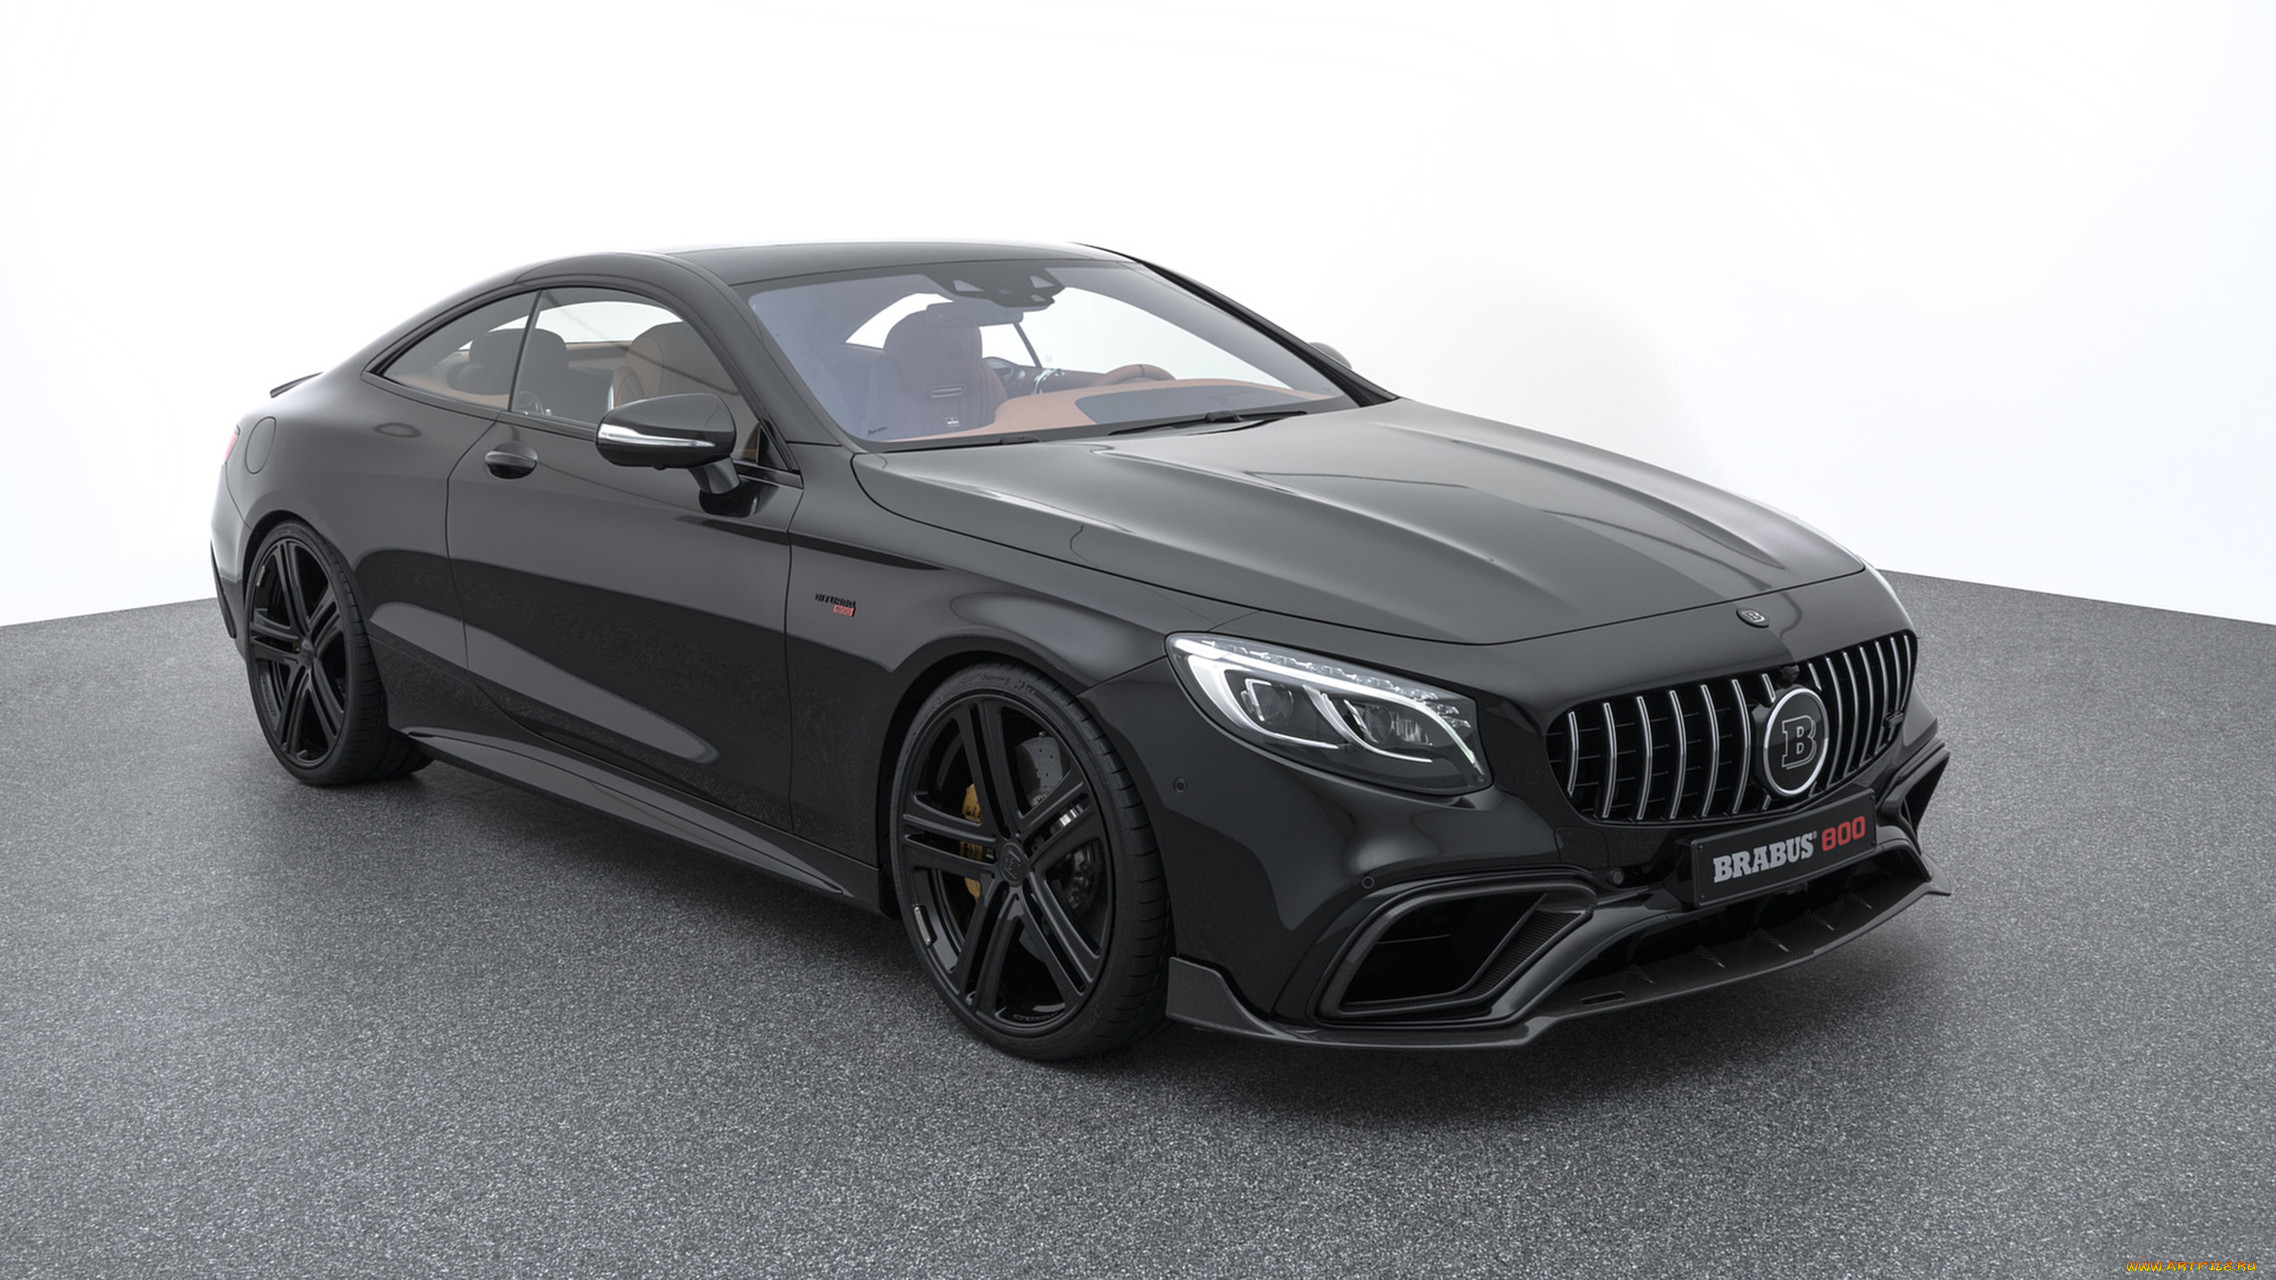 brabus 800 coupe based on mercedes-benz amg s-63 4matic coupe 2018, , brabus, coupe, 800, based, 2018, 4matic, s-63, amg, mercedes-benz